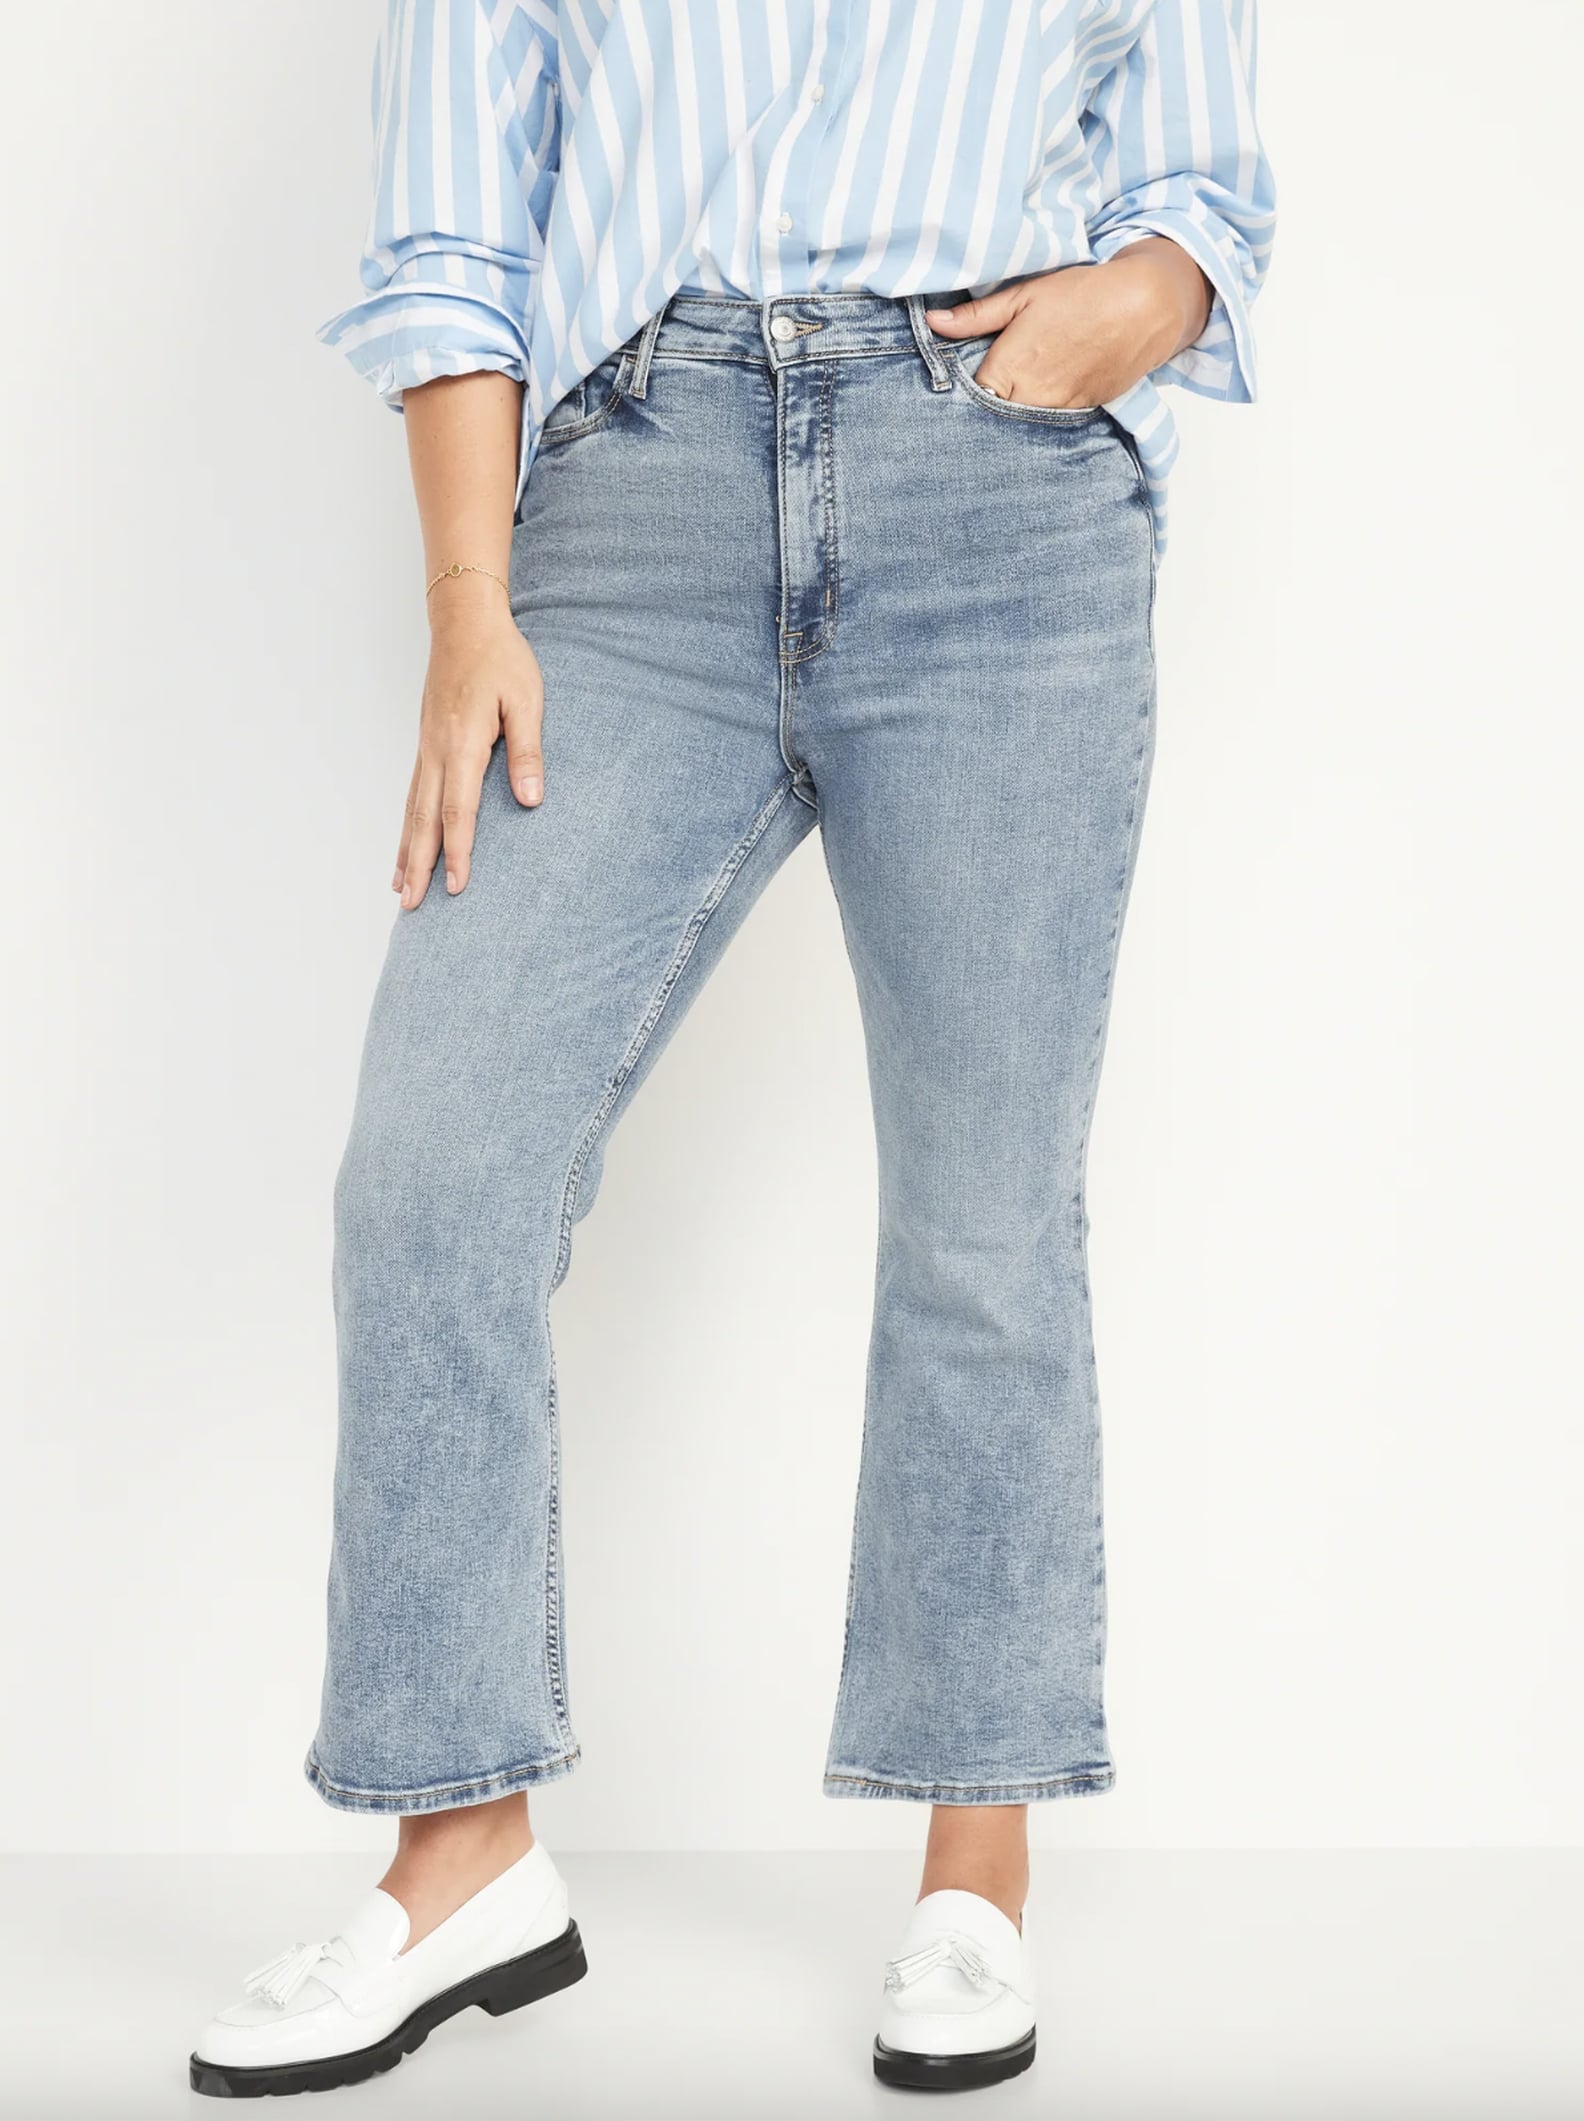 Denim Styling For Any Occasion, From Work to Date Night | POPSUGAR Fashion